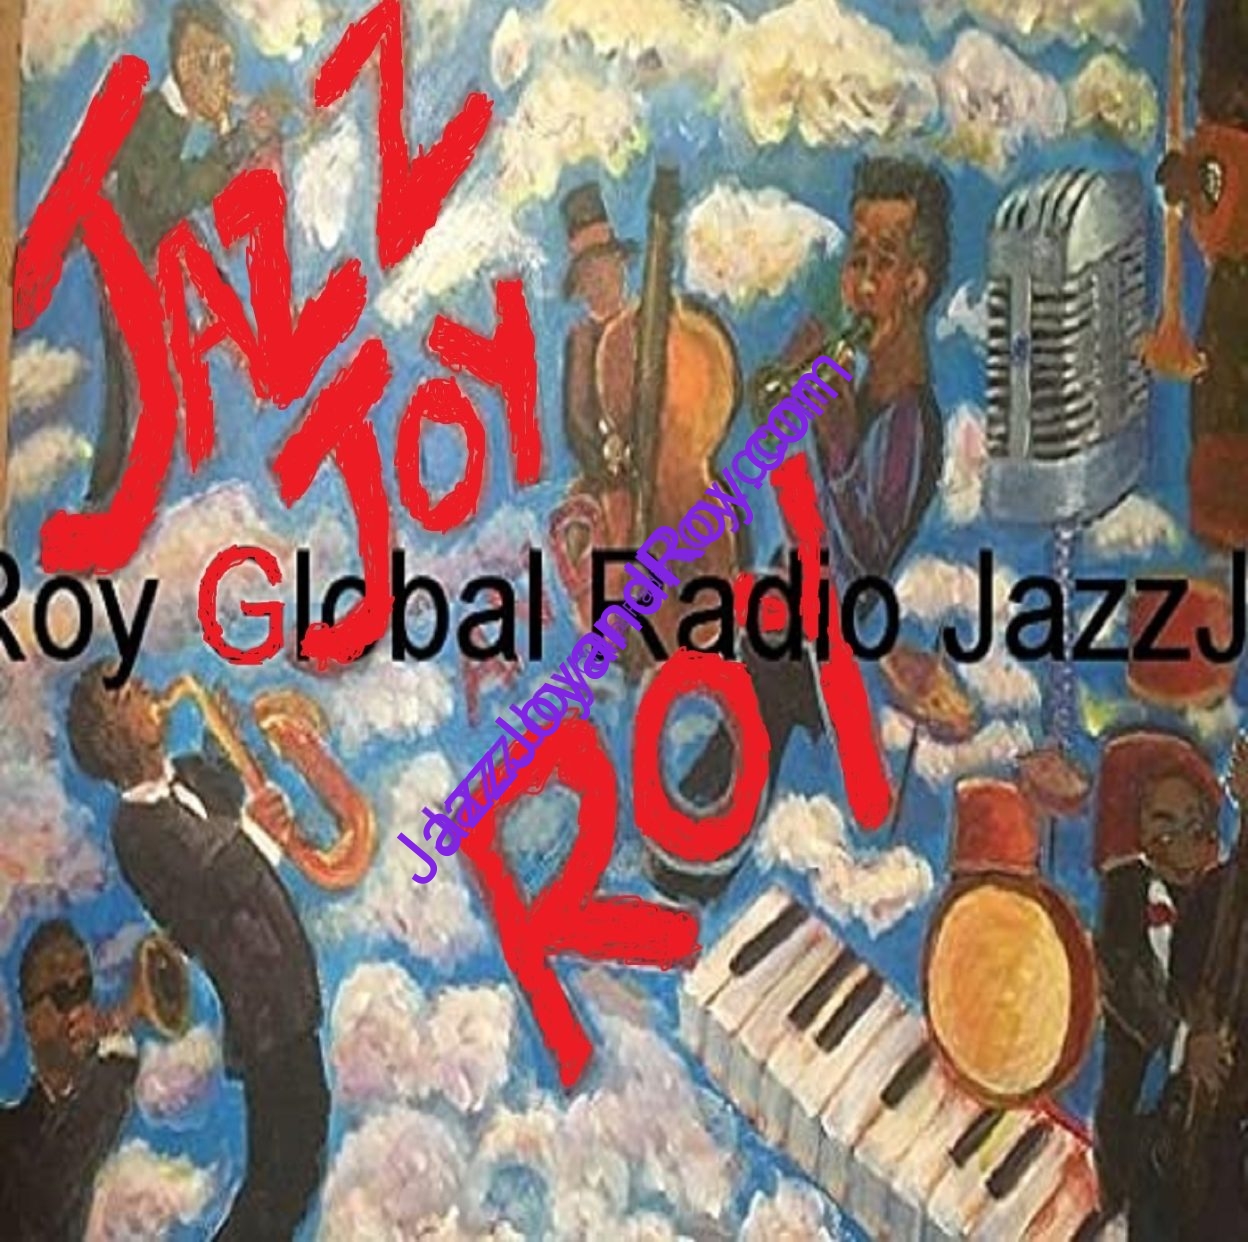 Breaking News from JazzJoyandRoy.com's Jazz Joy and Roy Global Radio–JazzJoyandRoy.com's Jazz Joy and Roy Global Radio invites families of the victims of The Virginia Commonwealth University shooting to join in on the 'Prayer For America On Our Knees'